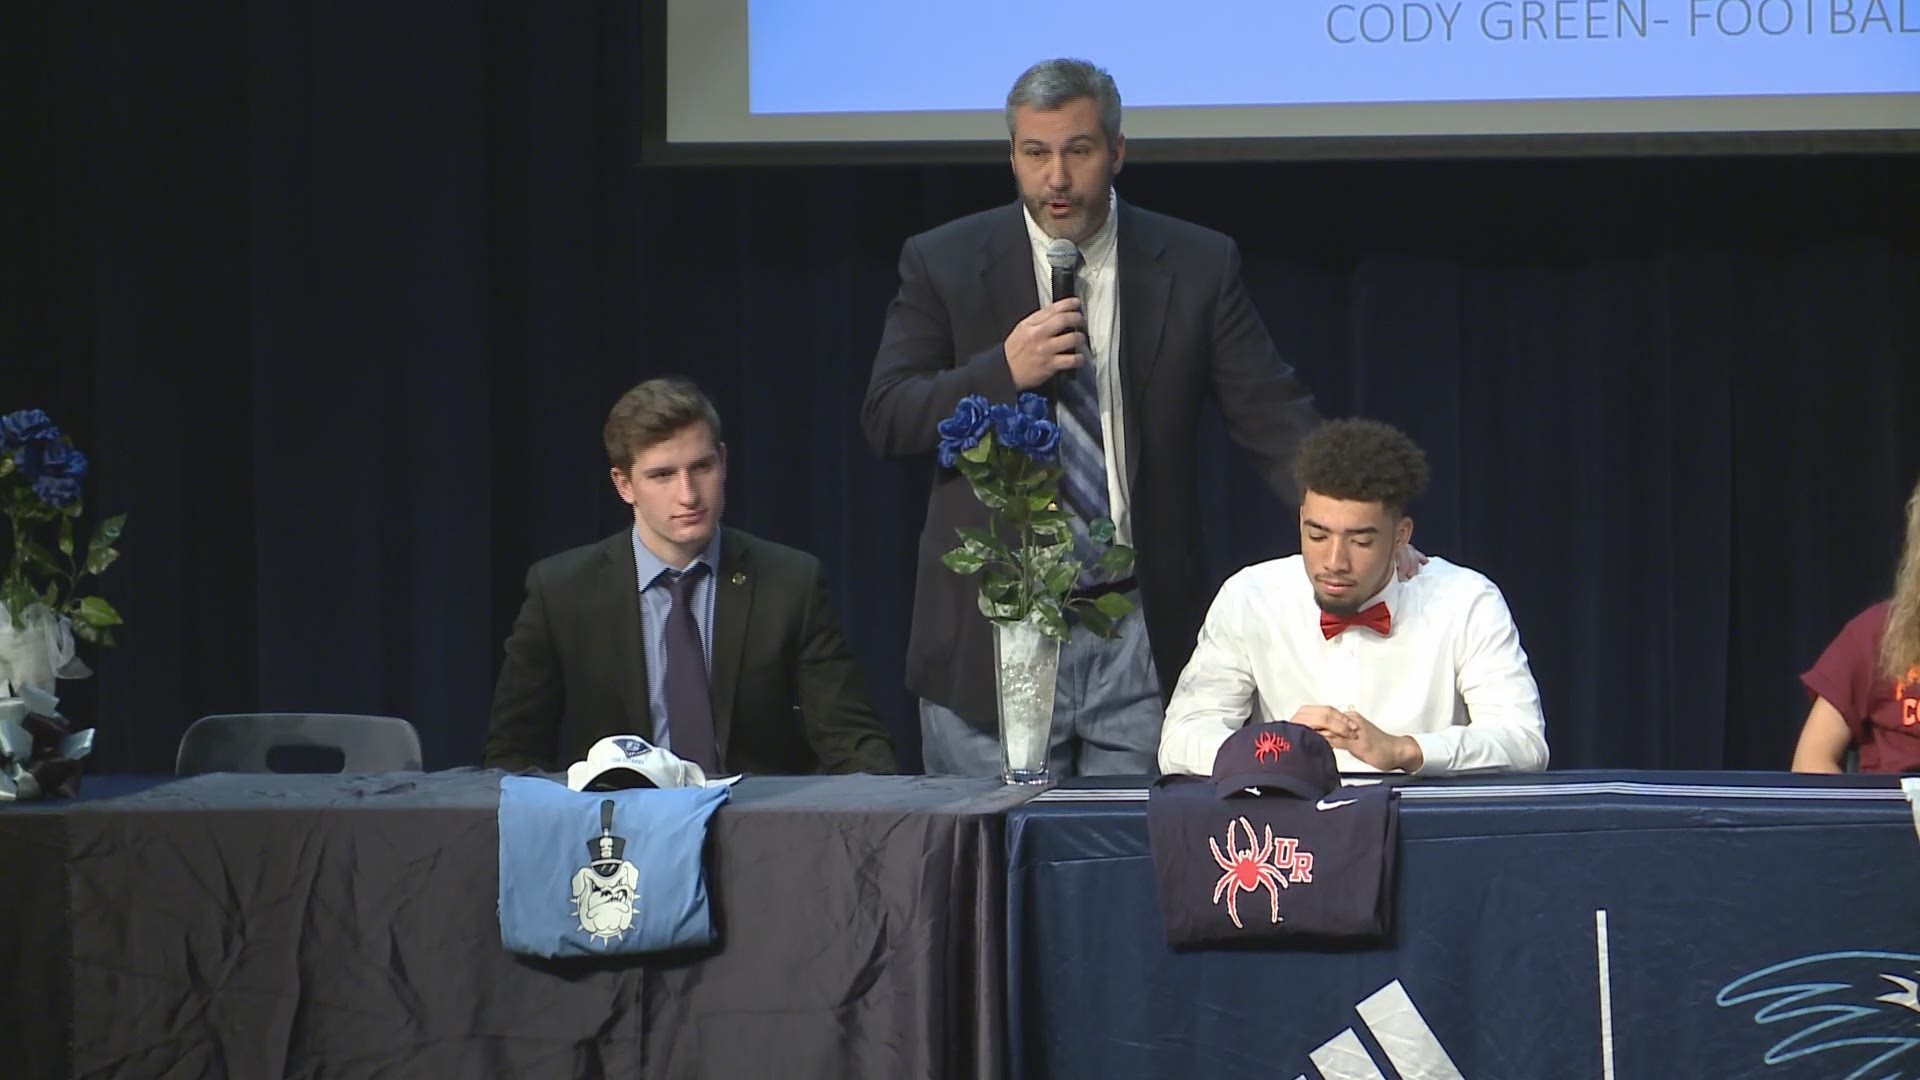 Hardin Valley running back Aaron Dykes will continue his football career at the Division I level in college with the Richmond Spiders. His dad and his high school football coach were college teammates at ETSU.